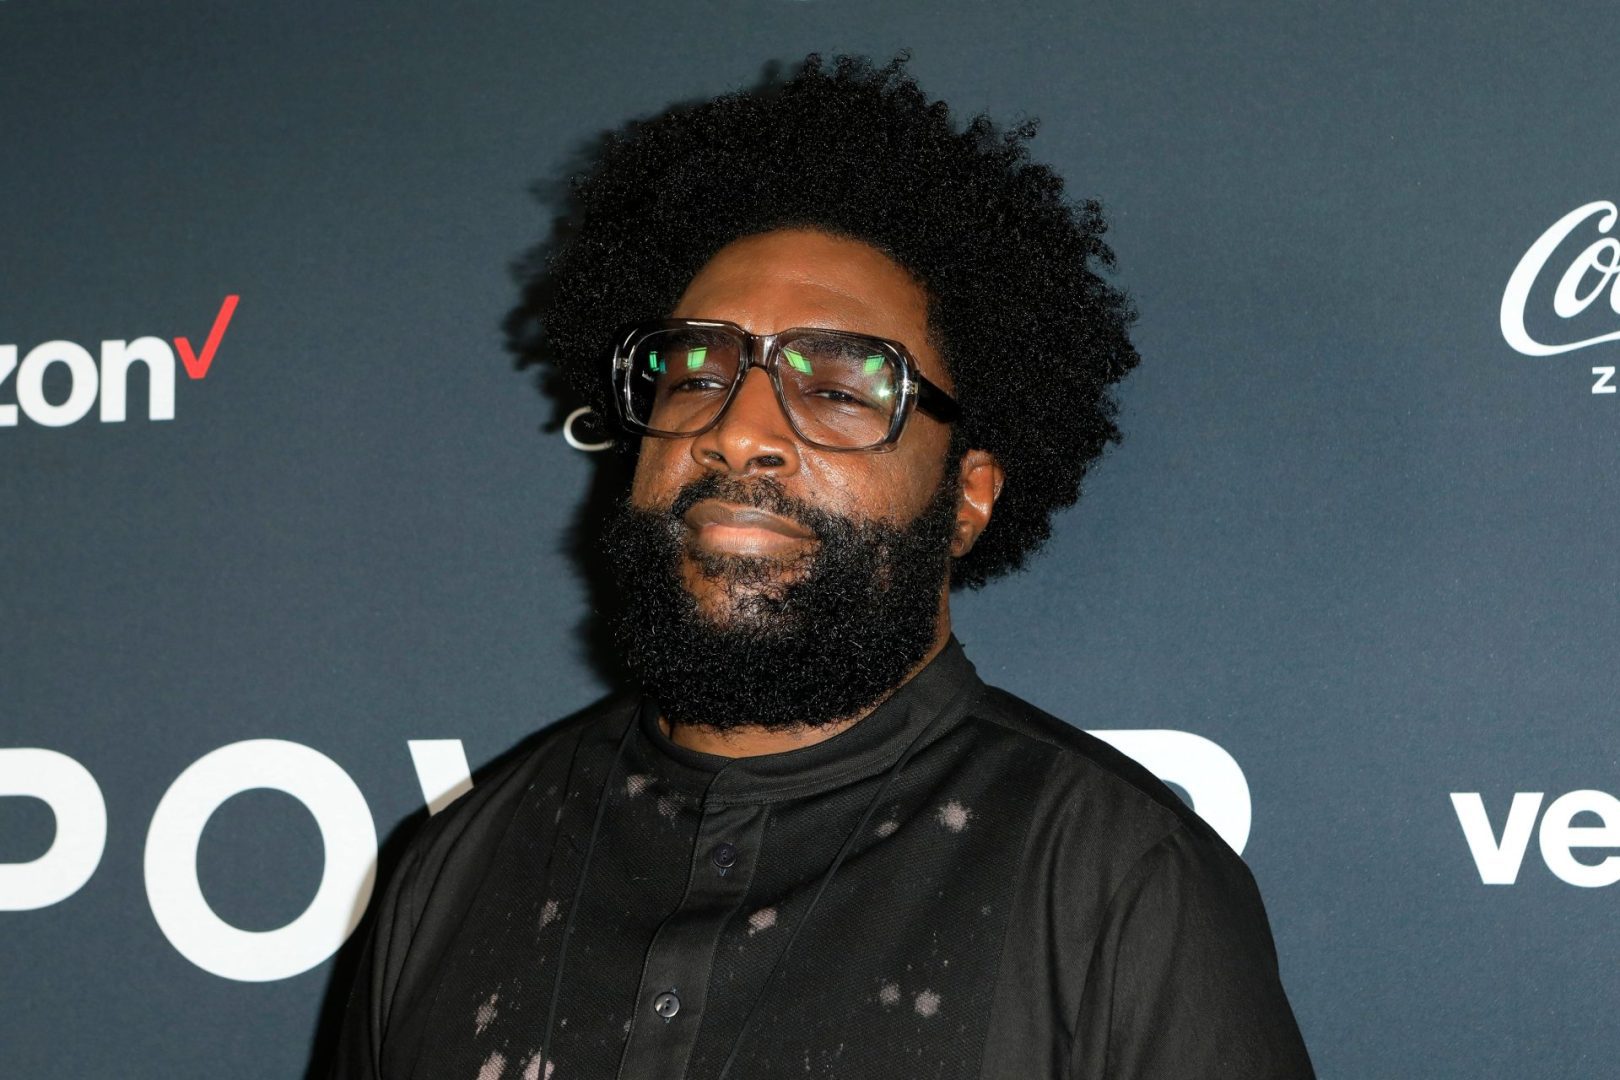 Questlove and LL Cool J to produce 'A Grammy Salute to 50 Years of Hip-Hop'